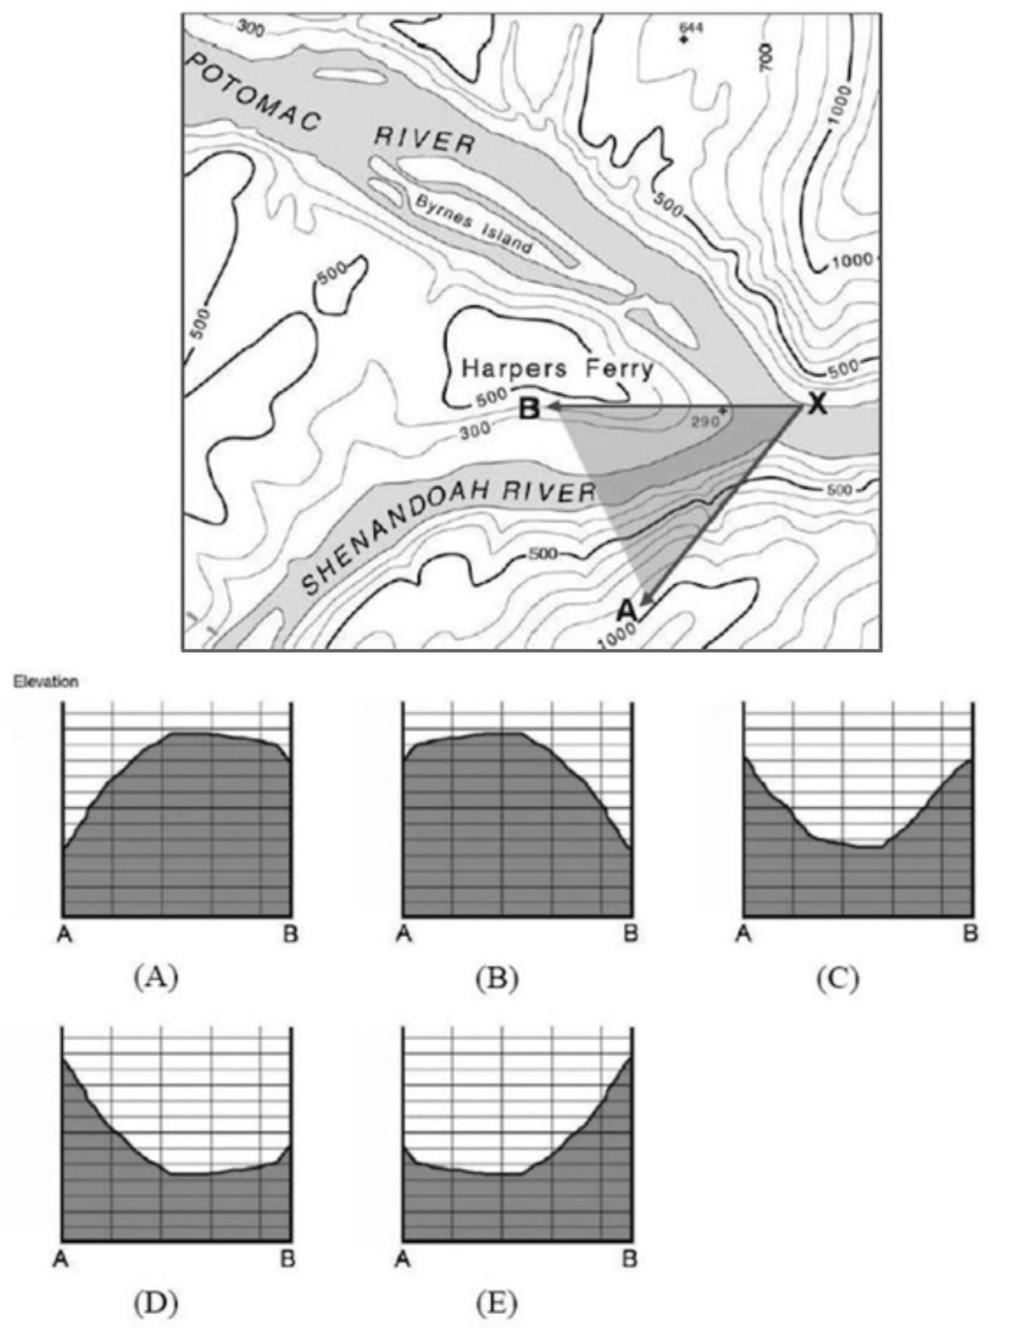 Kanika Verma 3. Imagine you are standing at location X and looking in the direction of A and B. Among five slope profiles (A E), which profile most closely represents what you would see?